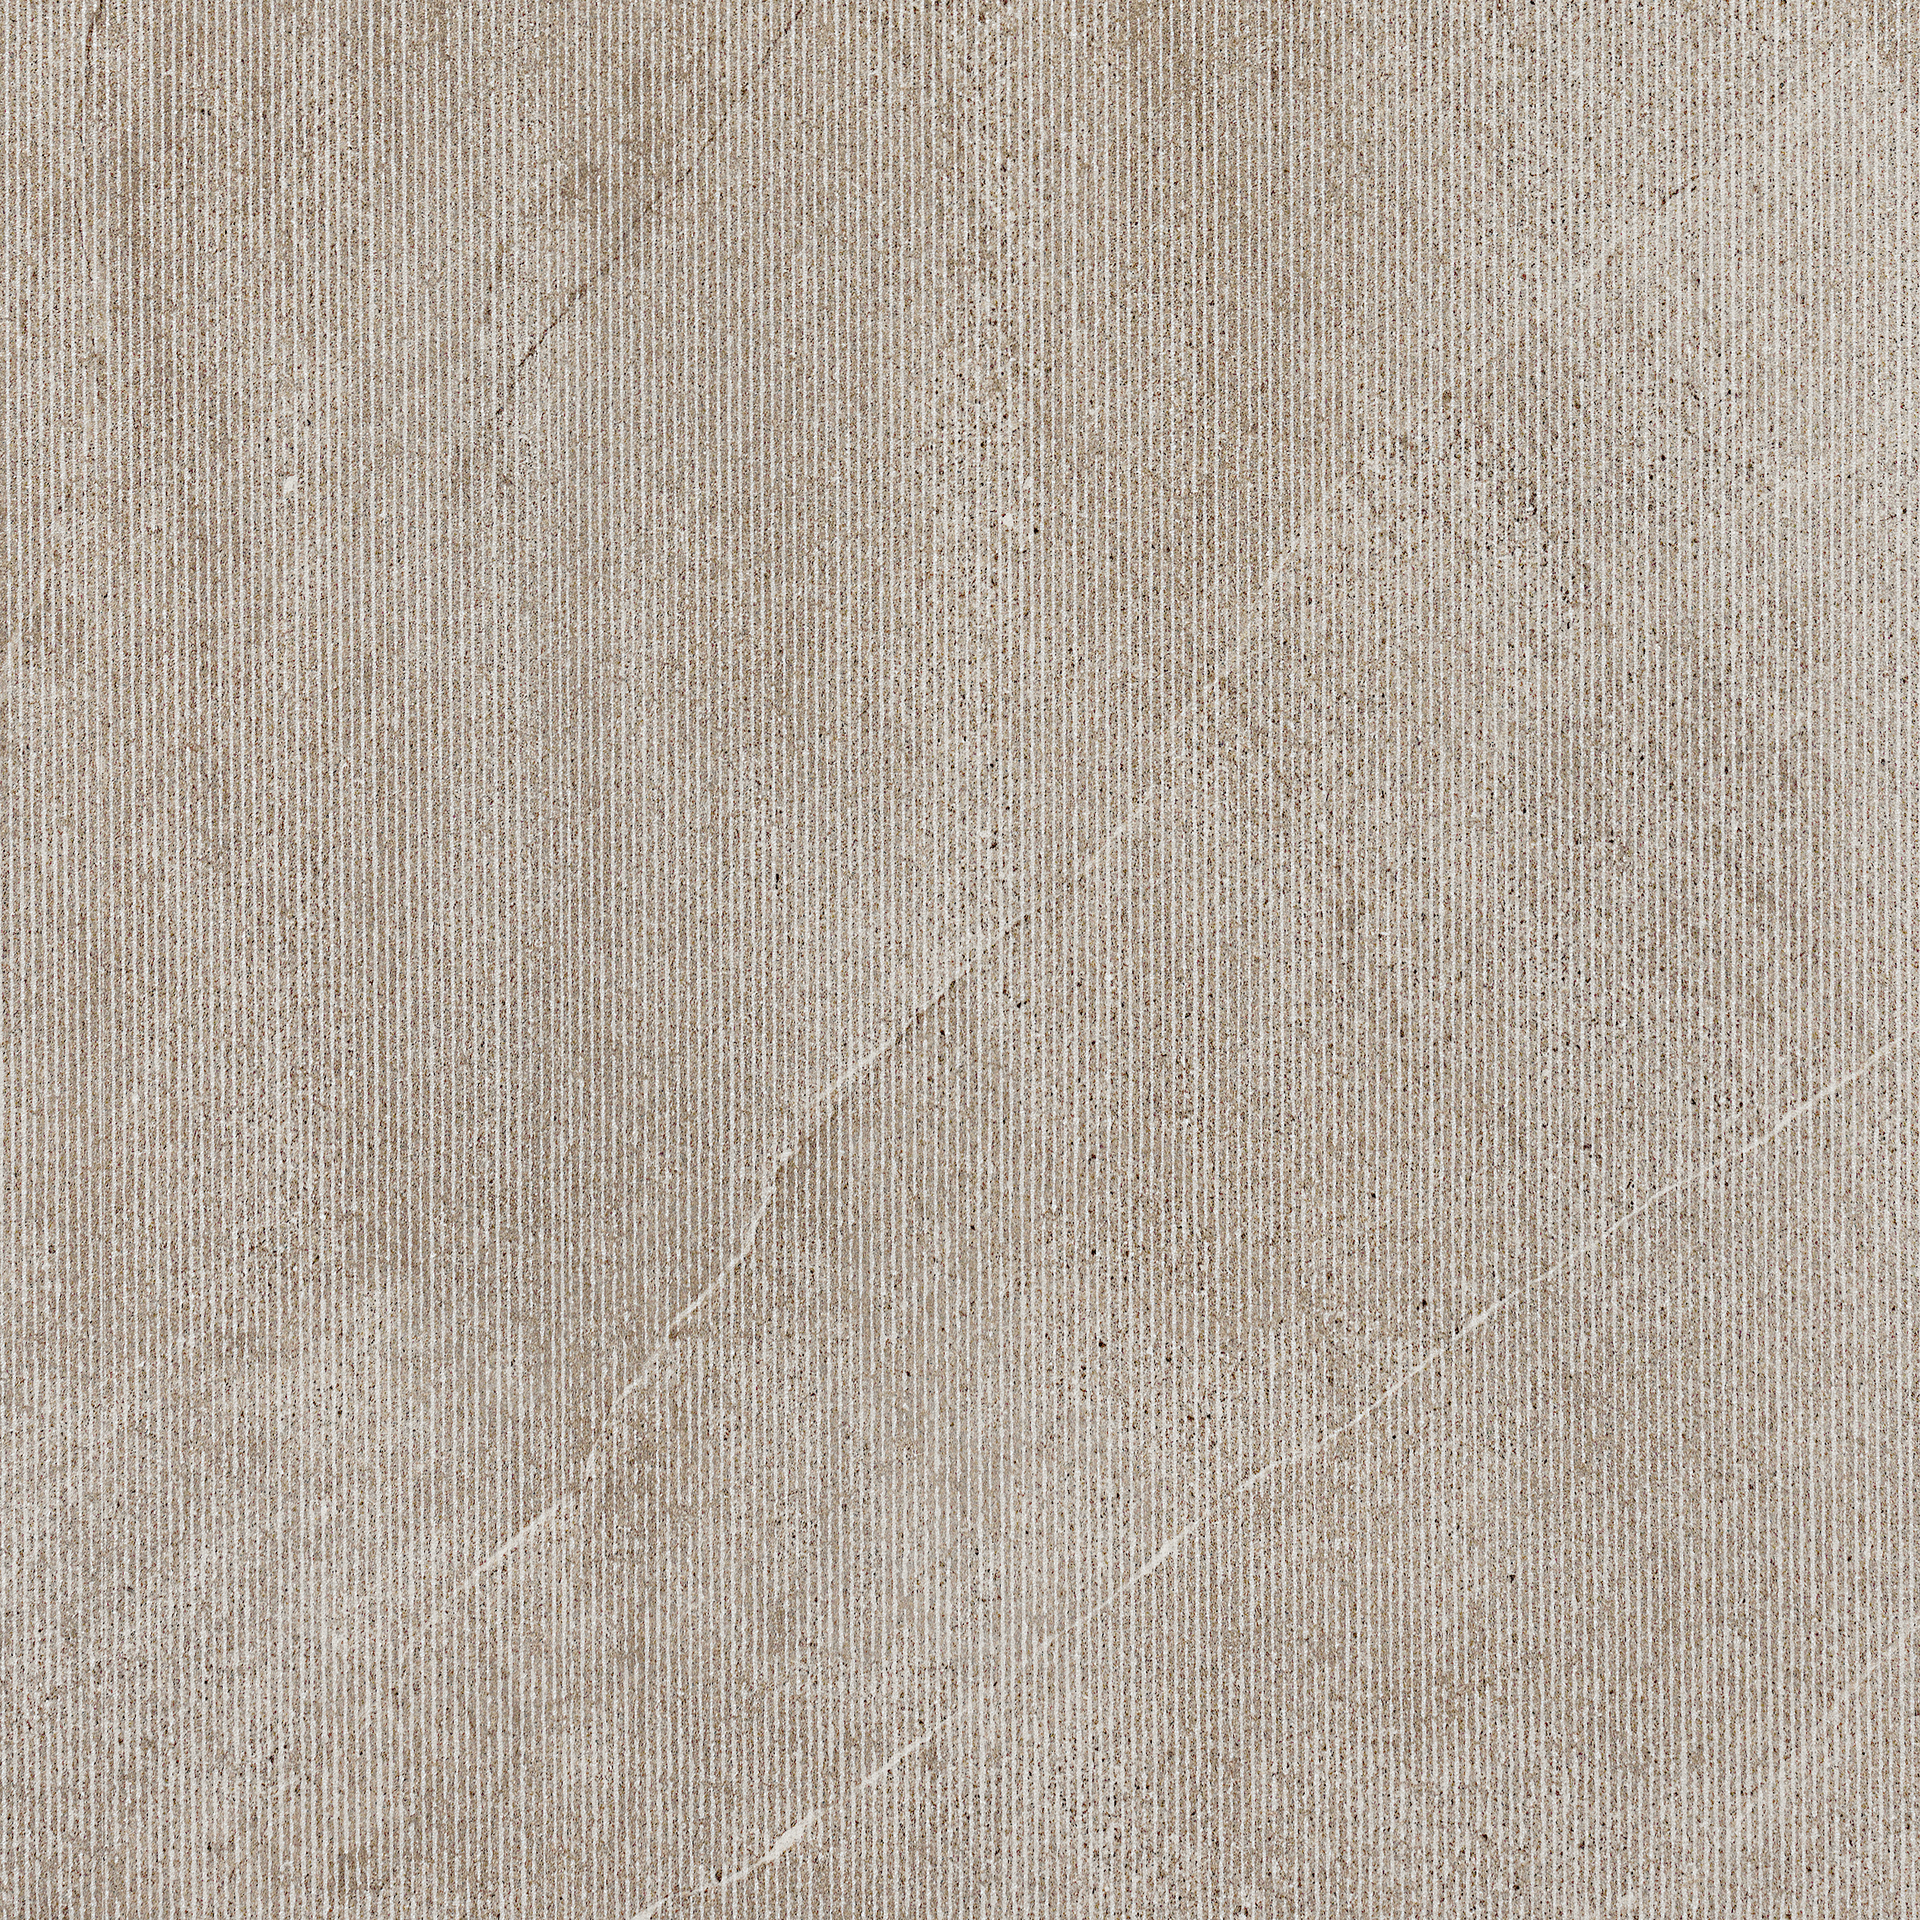 Lea Nextone Taupe Naturale – Antibacterial Line LGWNX62 60x60cm rectified 9,5mm